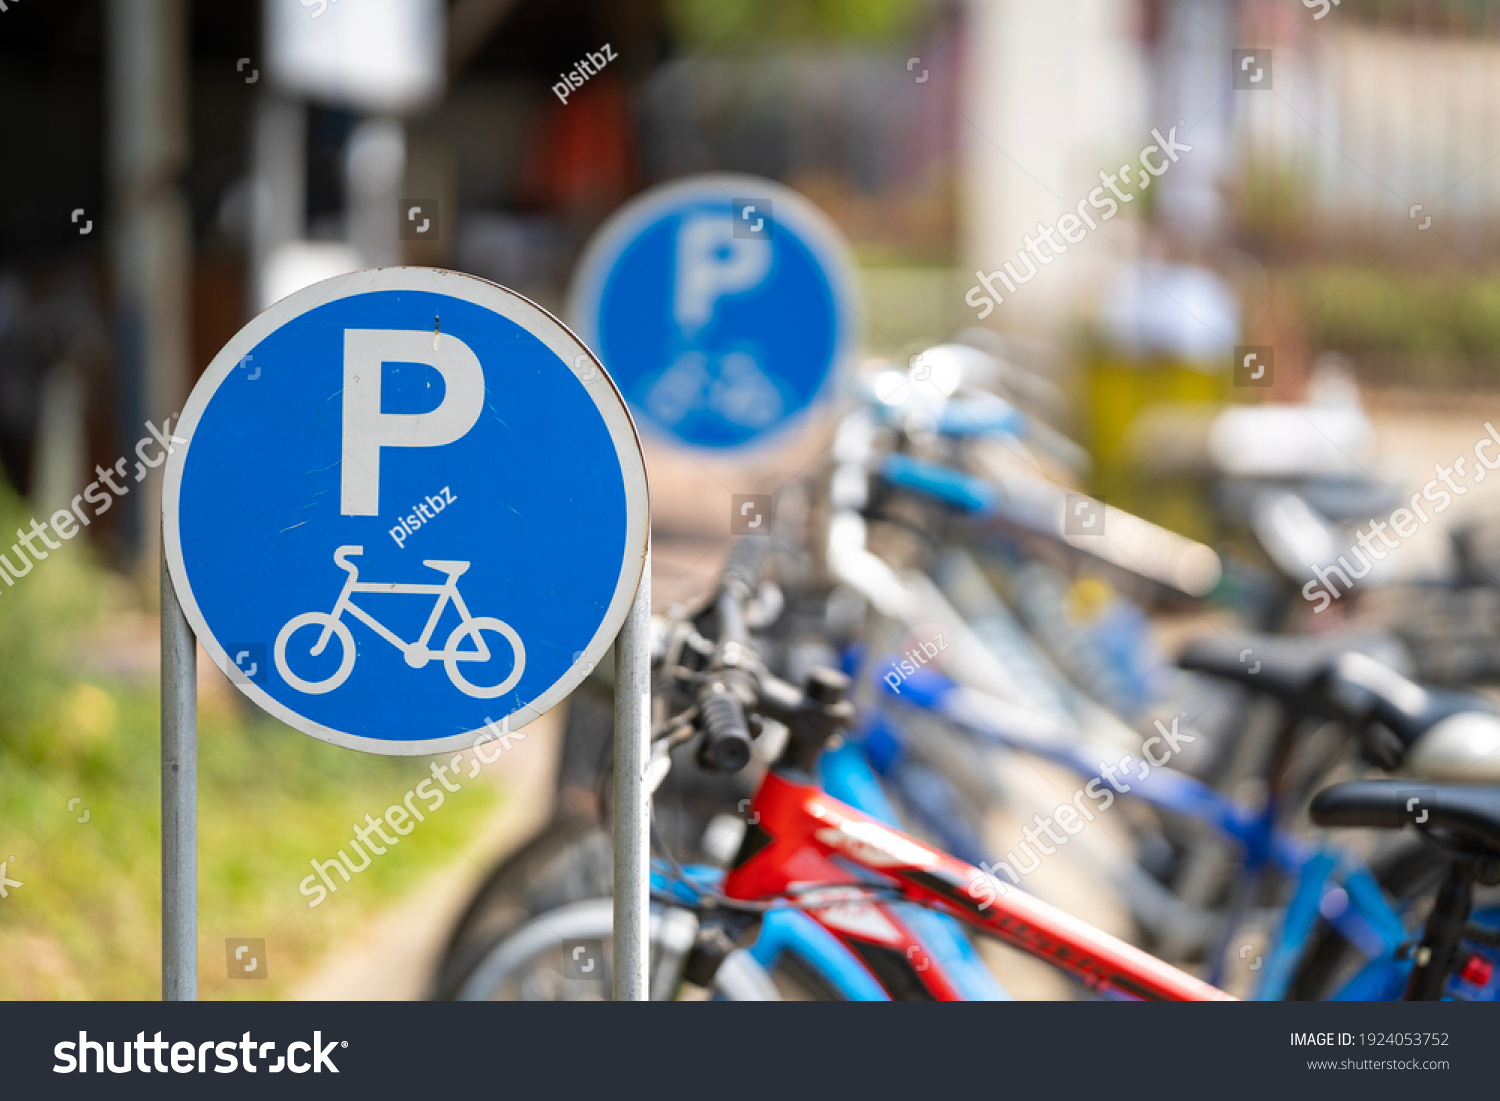 Bike parking sign with a blurred bicycle background. #1924053752